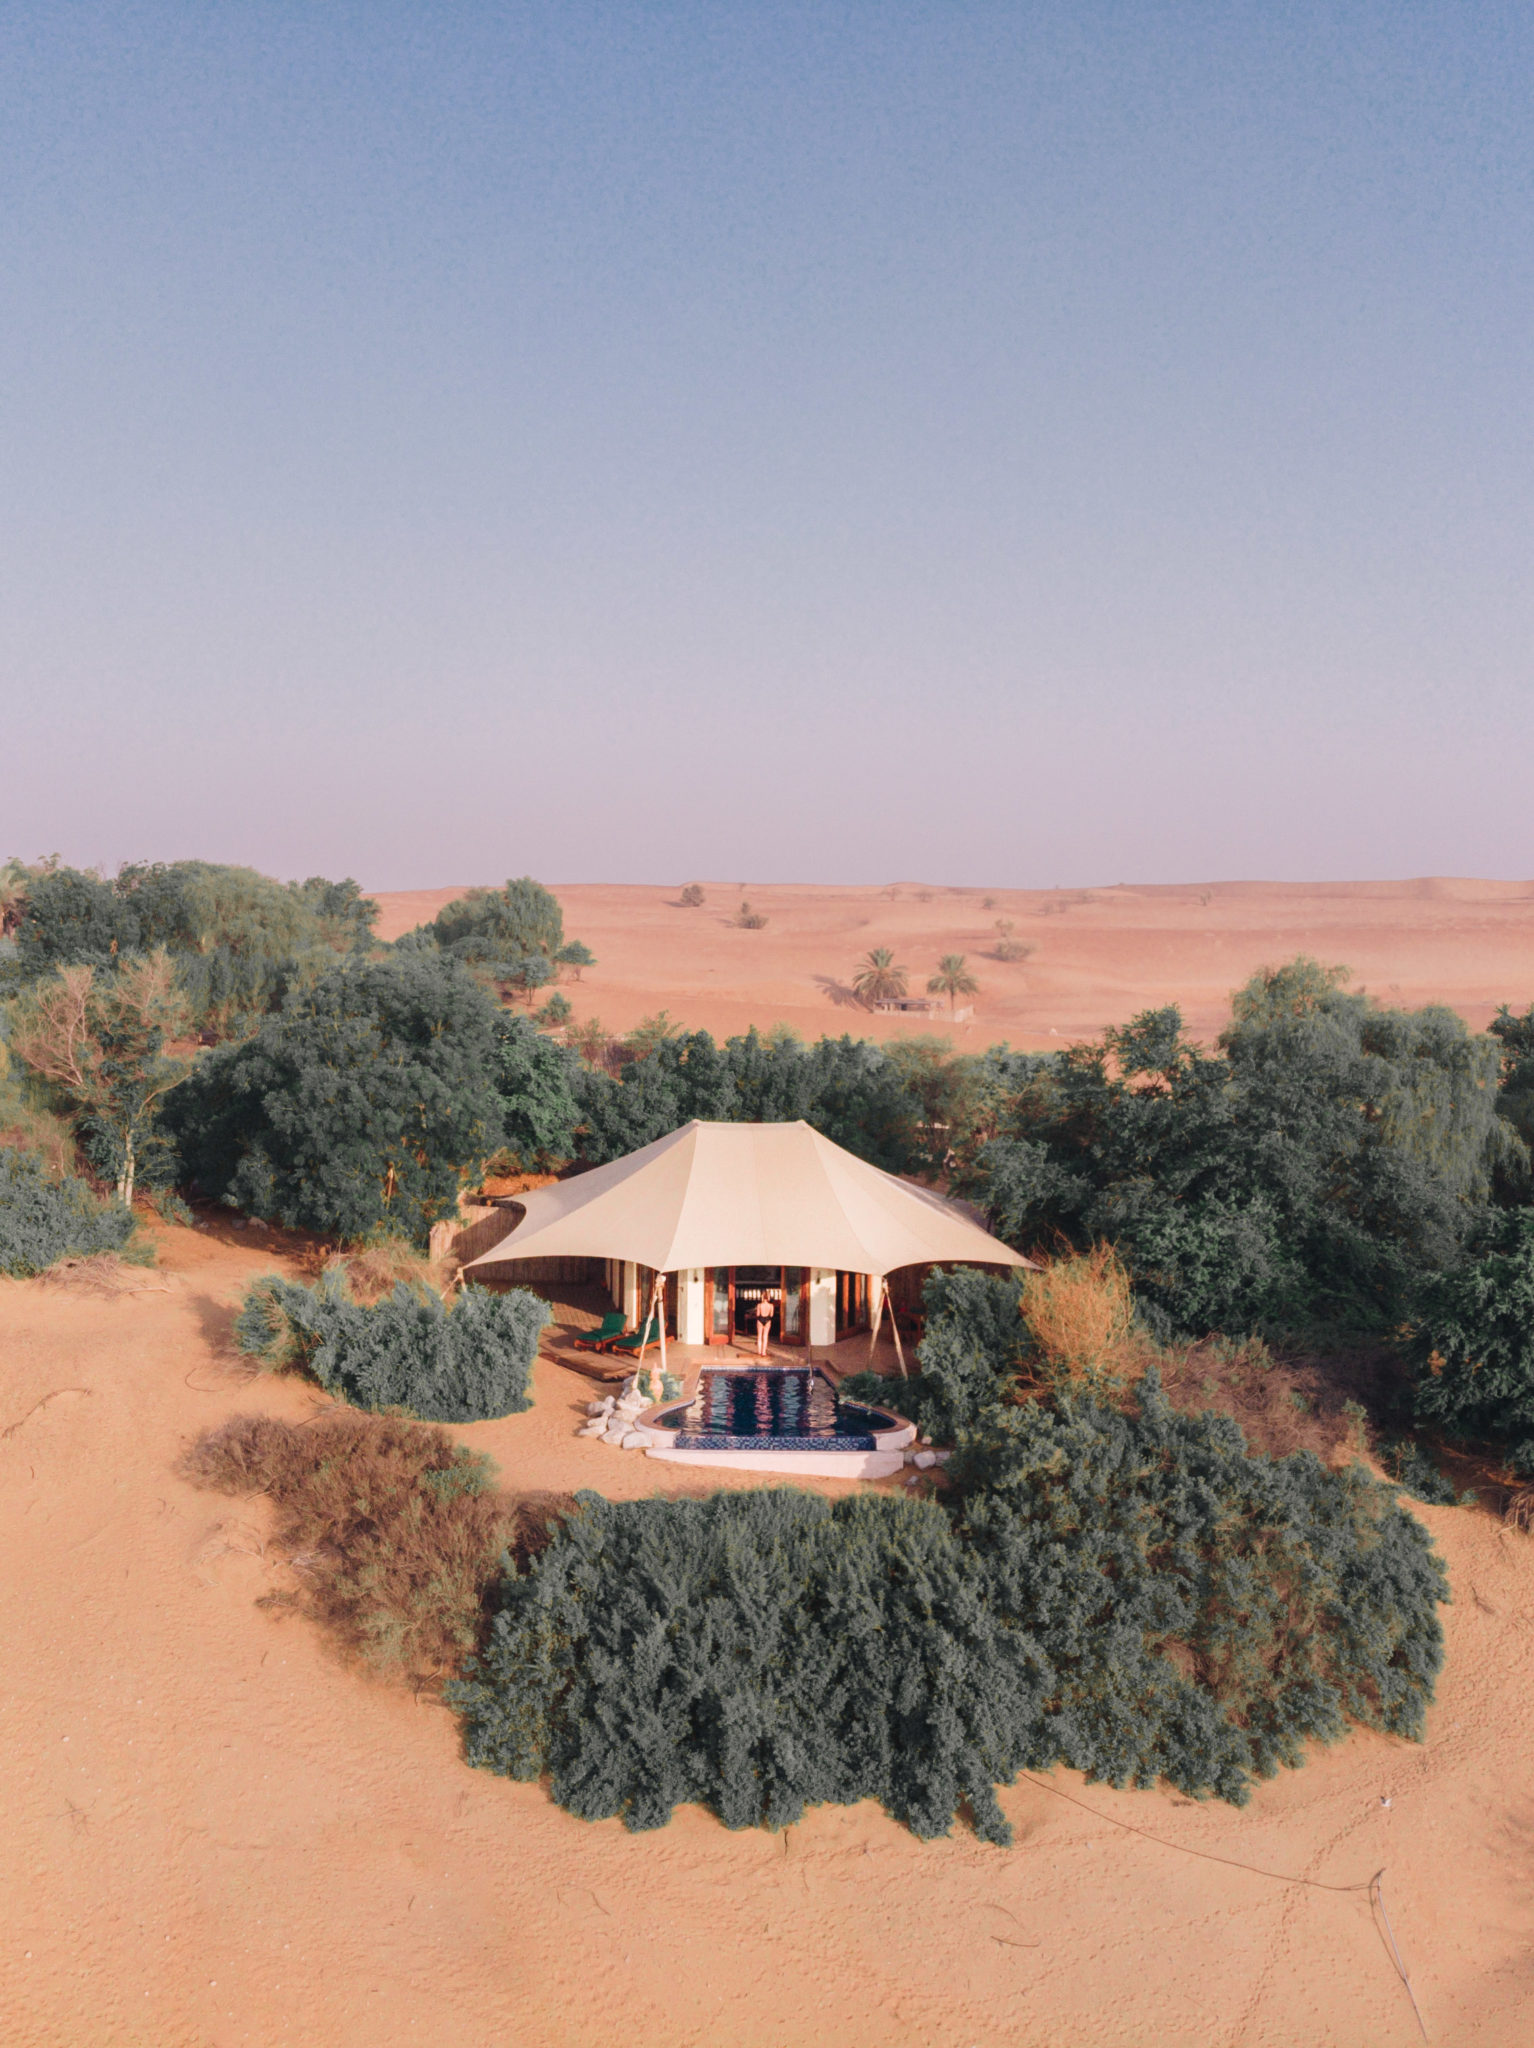 The 15 best glamping spots around the world